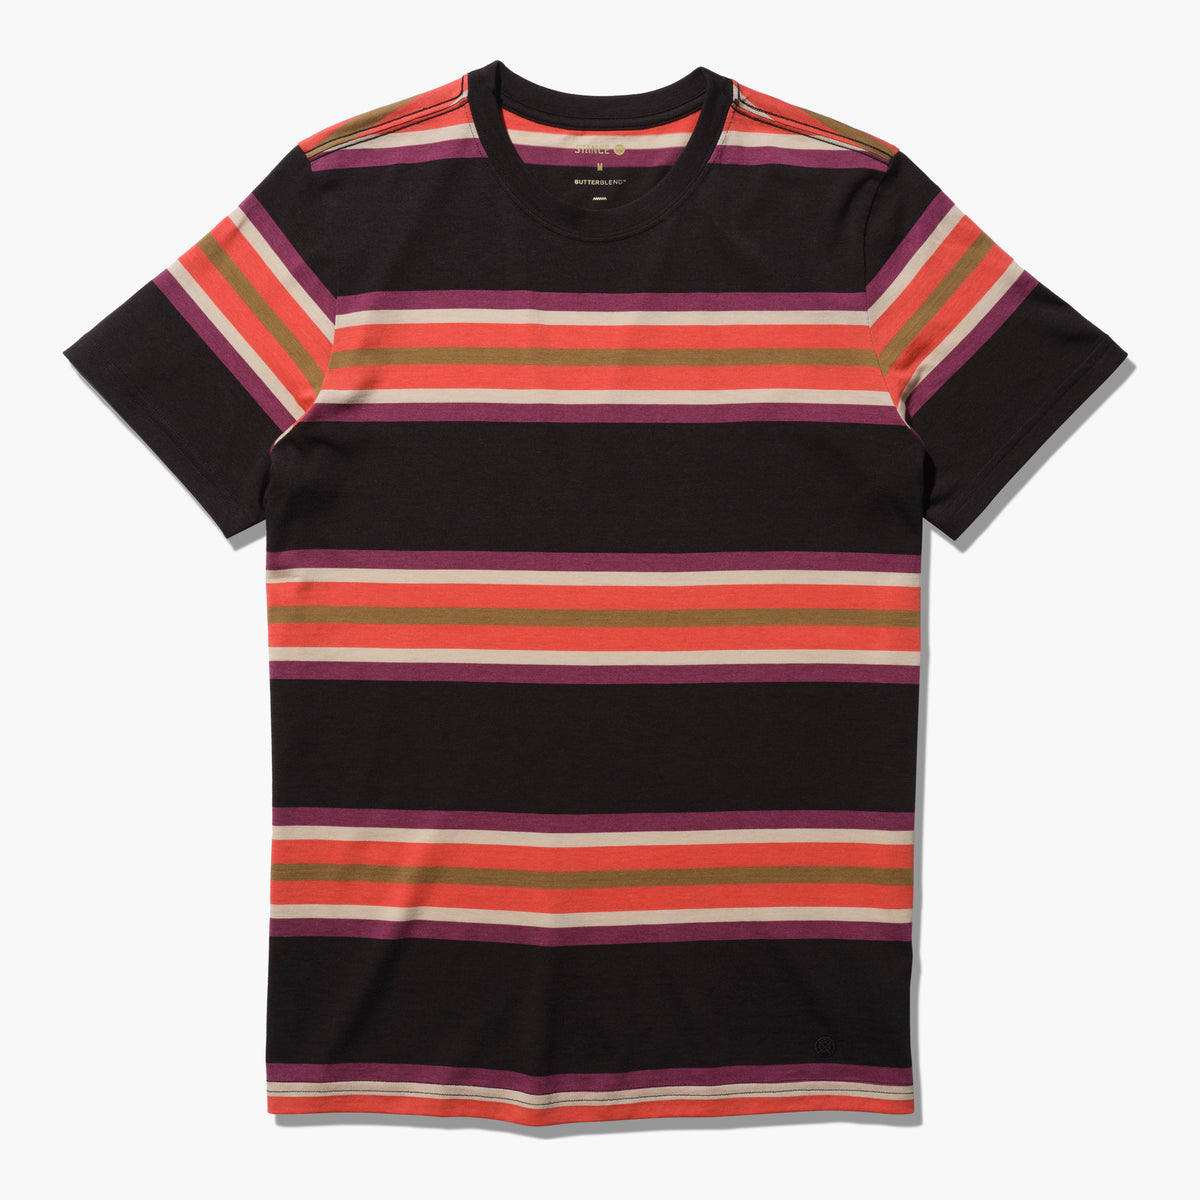 Butter Blend SS T - Black/Red – The Waiting Room